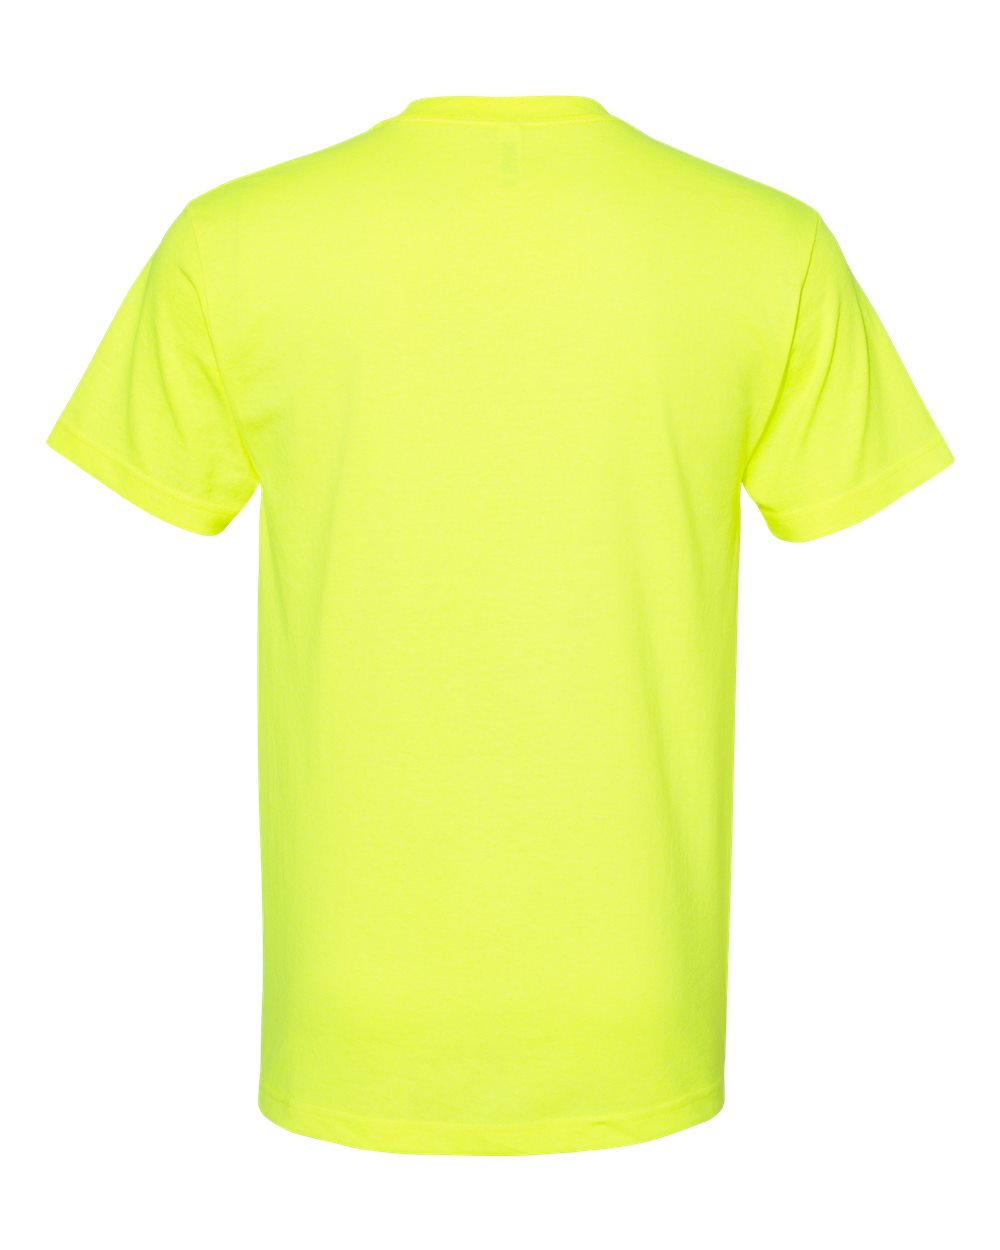 American Apparel Unisex Heavyweight Cotton Tee 1301 #color_Safety Green